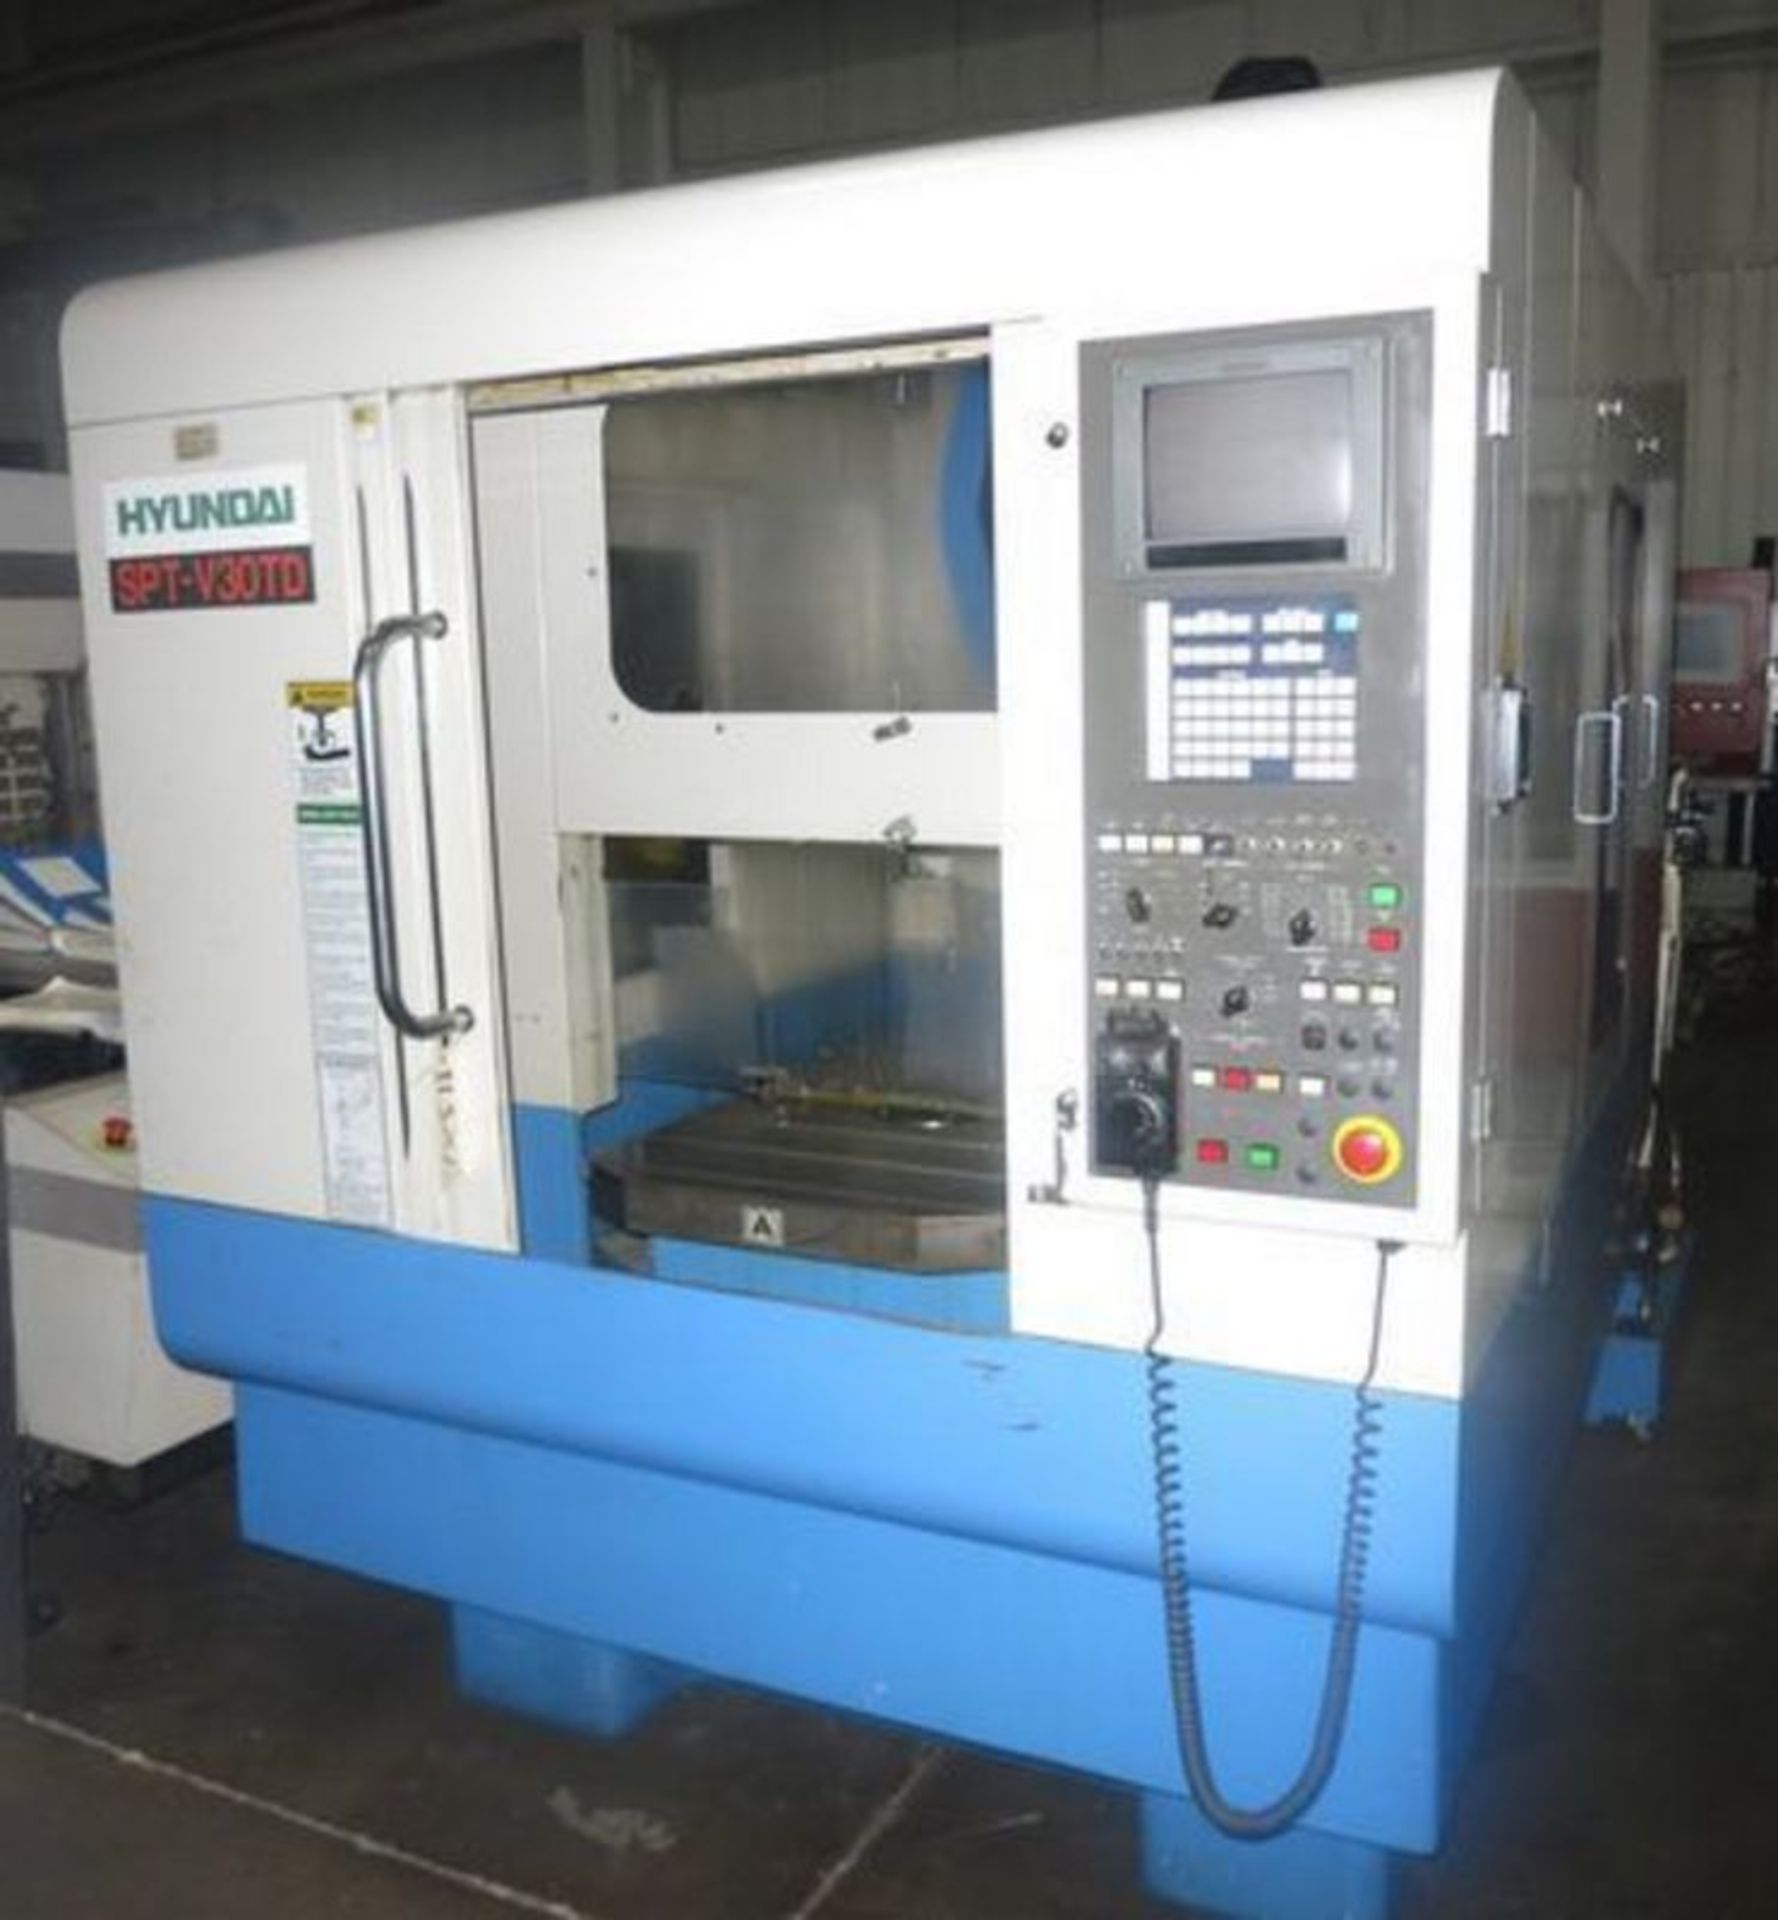 Hyundai SPTV30TD CNC Tapmill Center with Pallet Changer, S/N 73H8056, New 1999 General